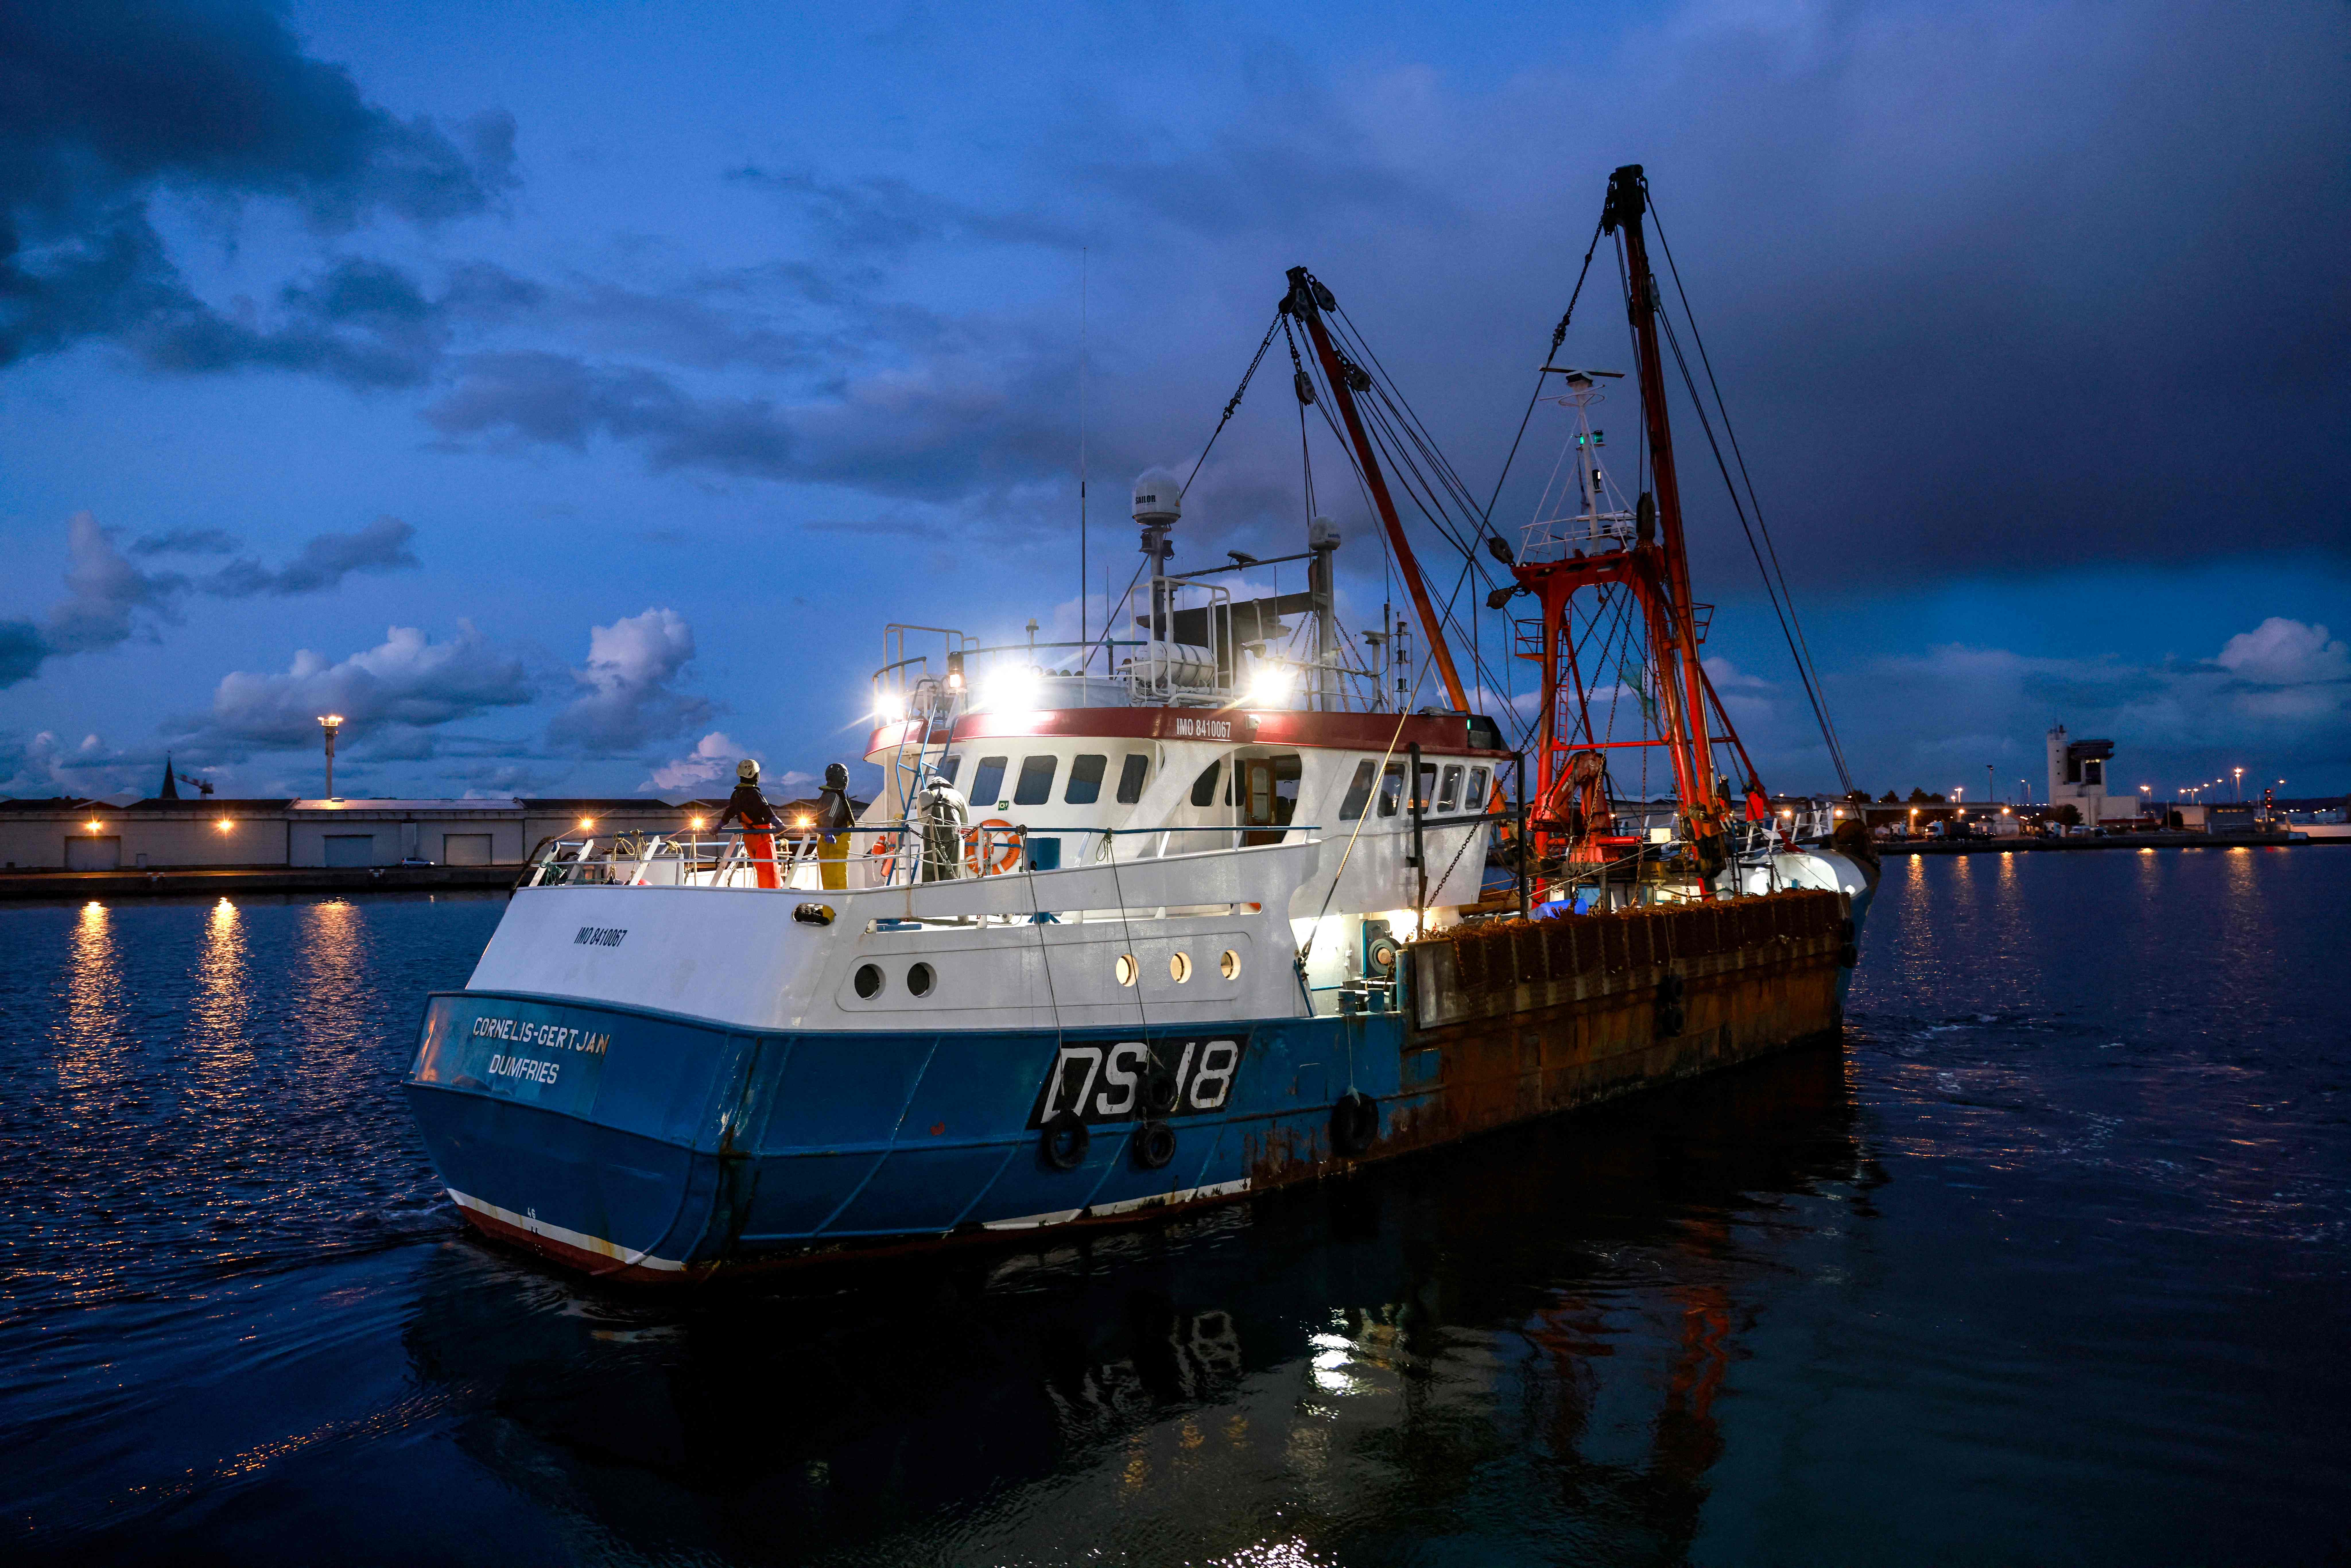 The trawler "Cornelis-Gert Jan" leaves the northern French port of Le Havre